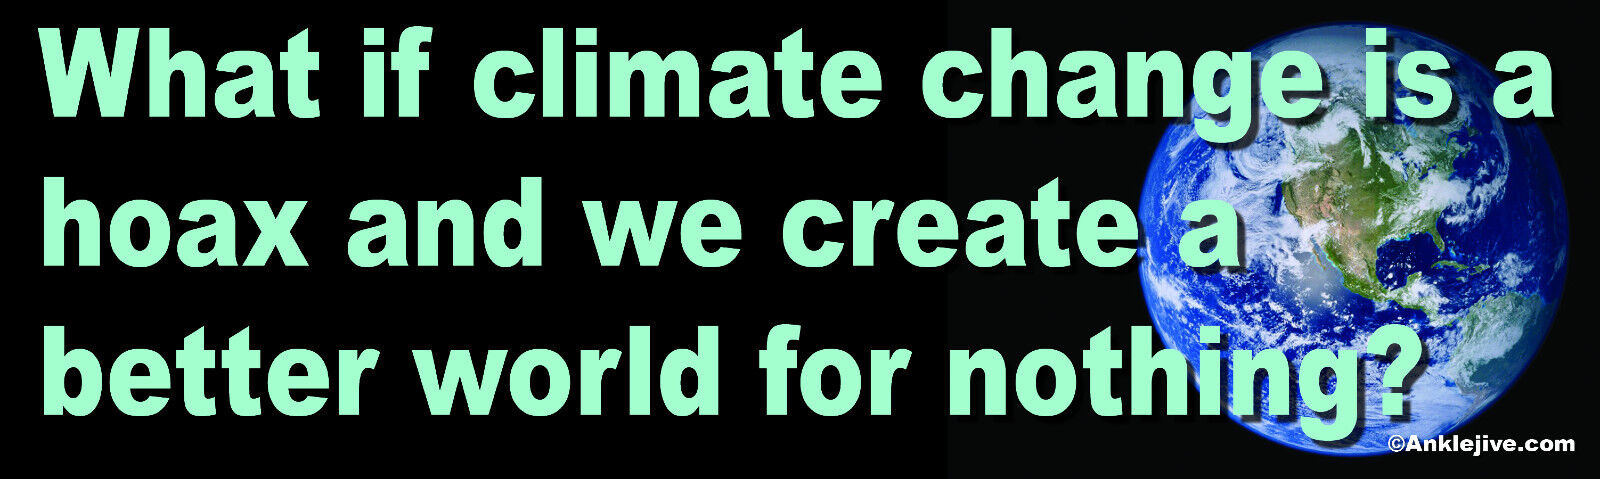 What If Climate Change Is A Hoax And We... - Liberal Window/Bumper Sticker